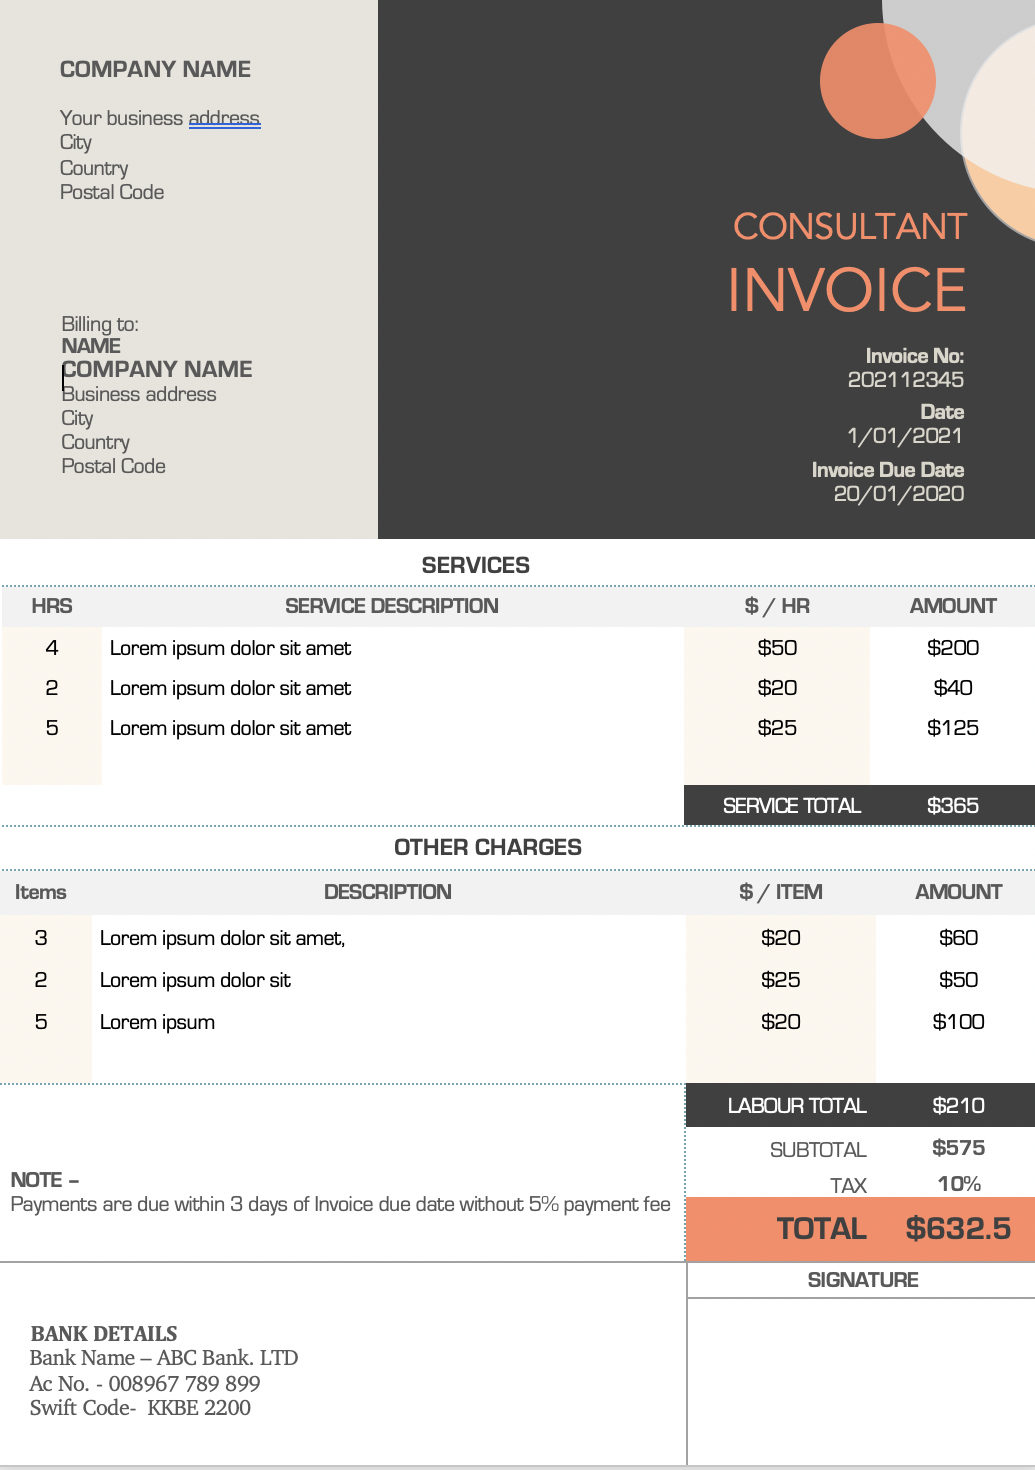 12-unique-invoice-templates-for-consultants-download-for-free